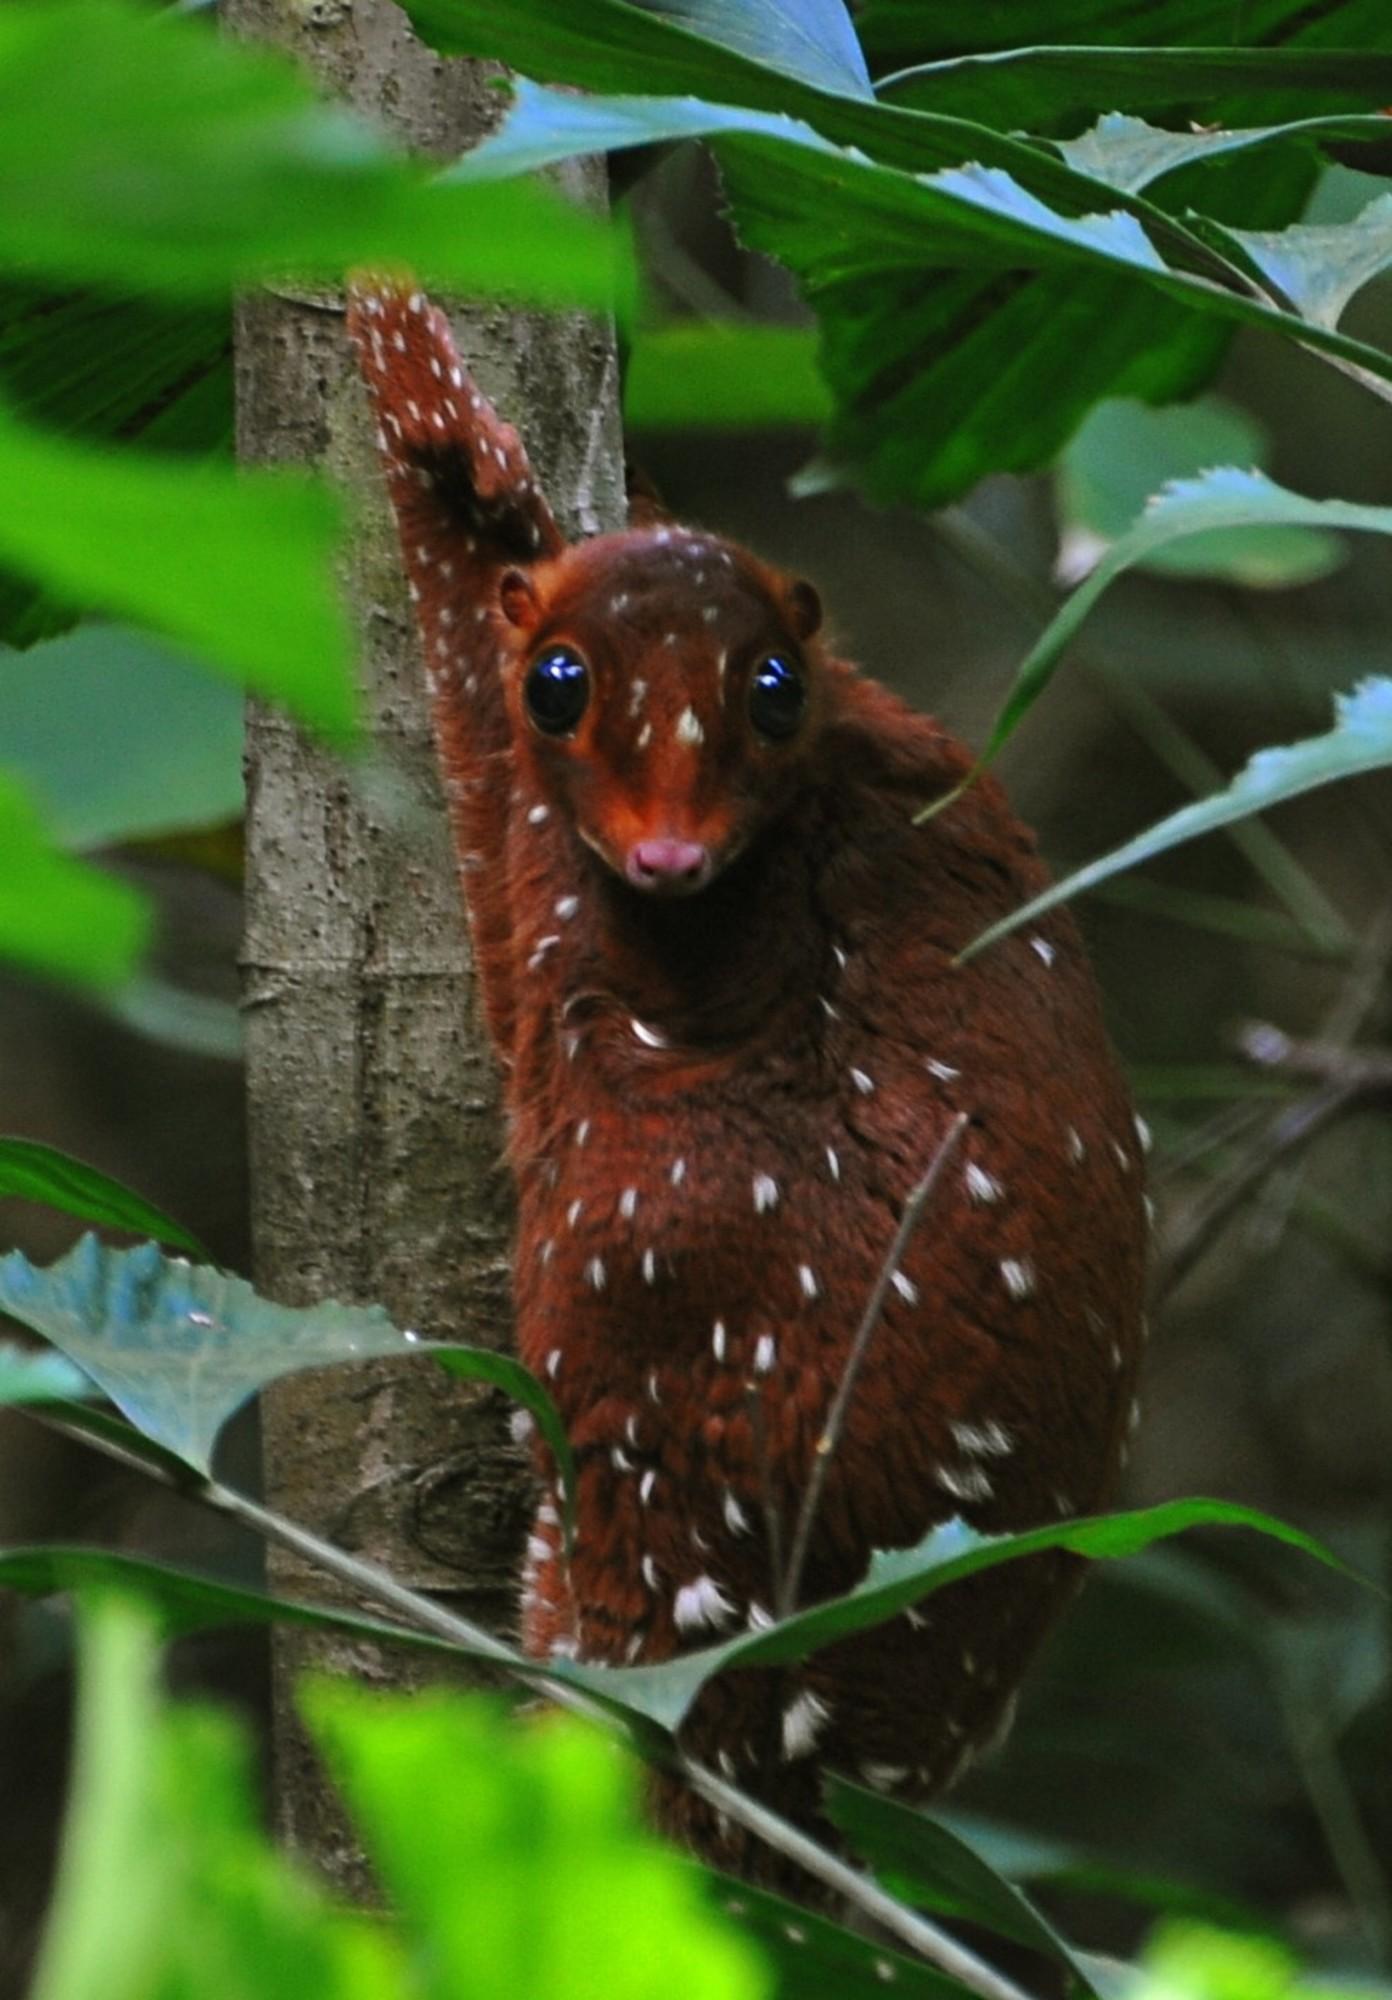 The Sunda flying lemur is not a lemur and does not fly. It's